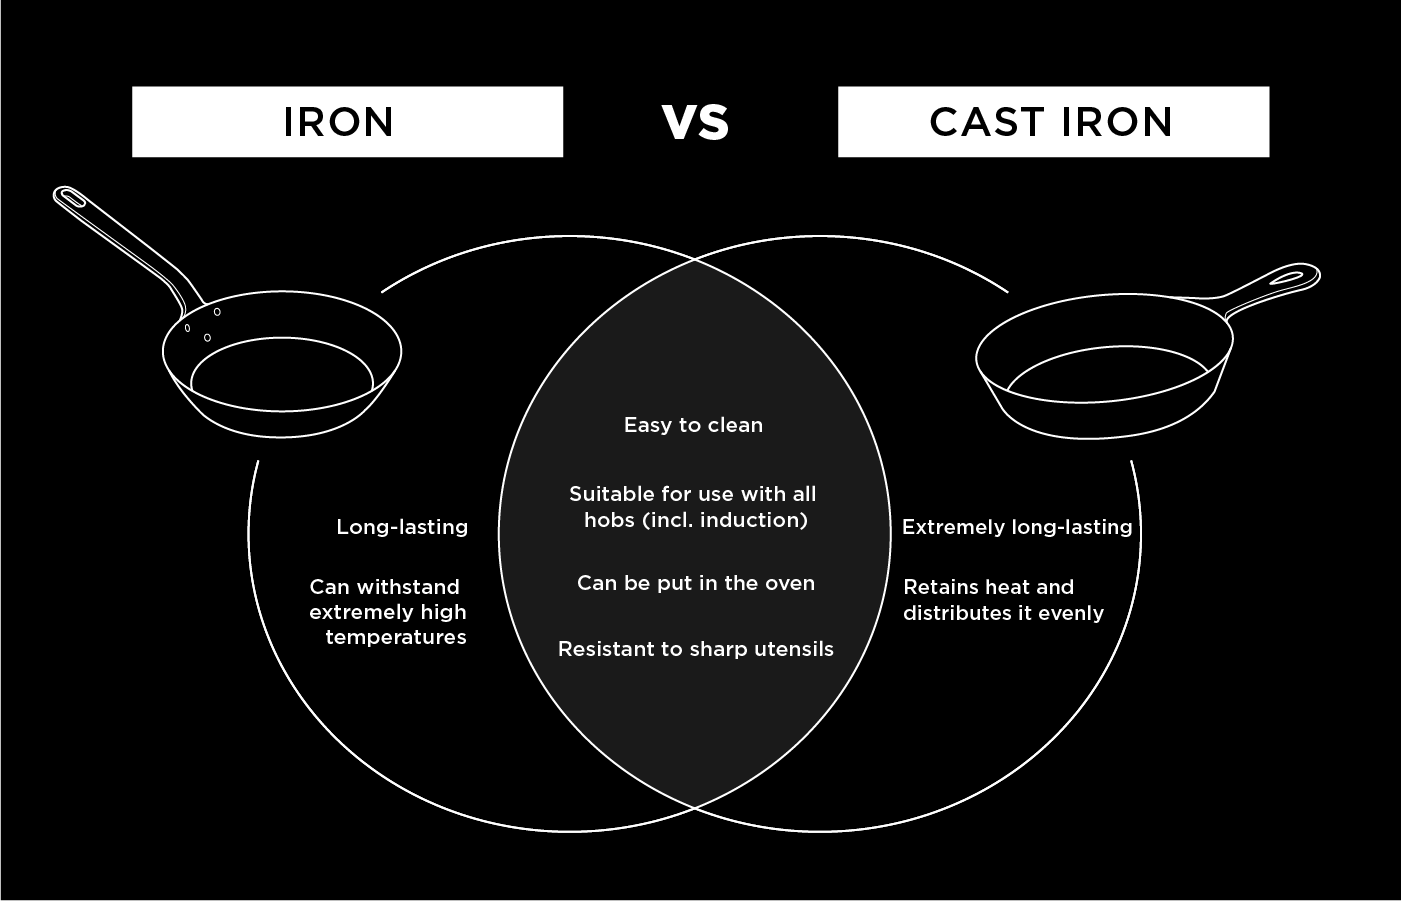 WAS Germany Comparing iron and cast-iron pans